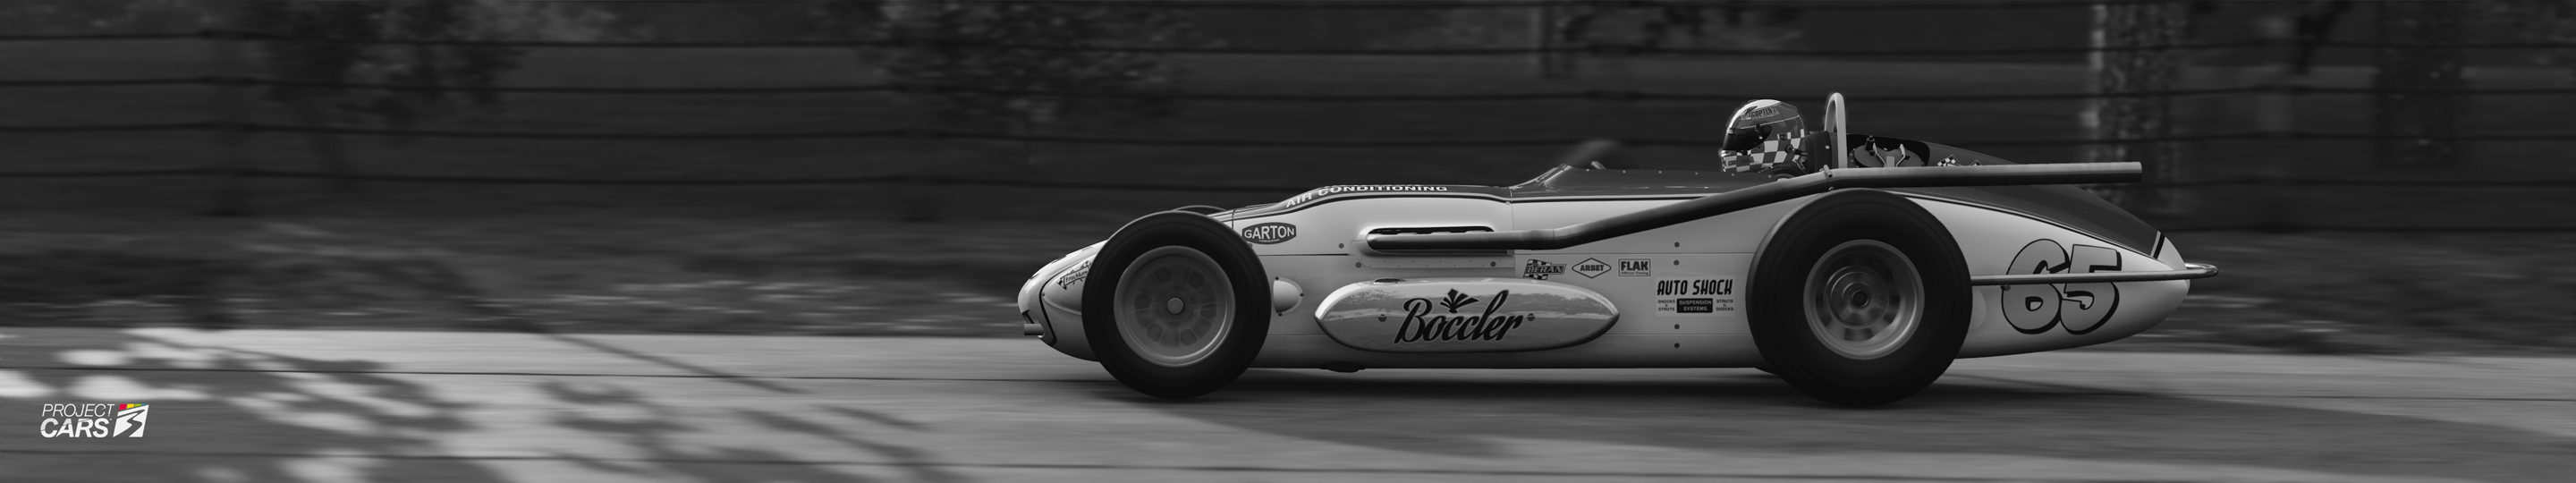 0 PROJECT CARS 3 WATSON ROADSTER at MONZA HISTORIC copy.jpg